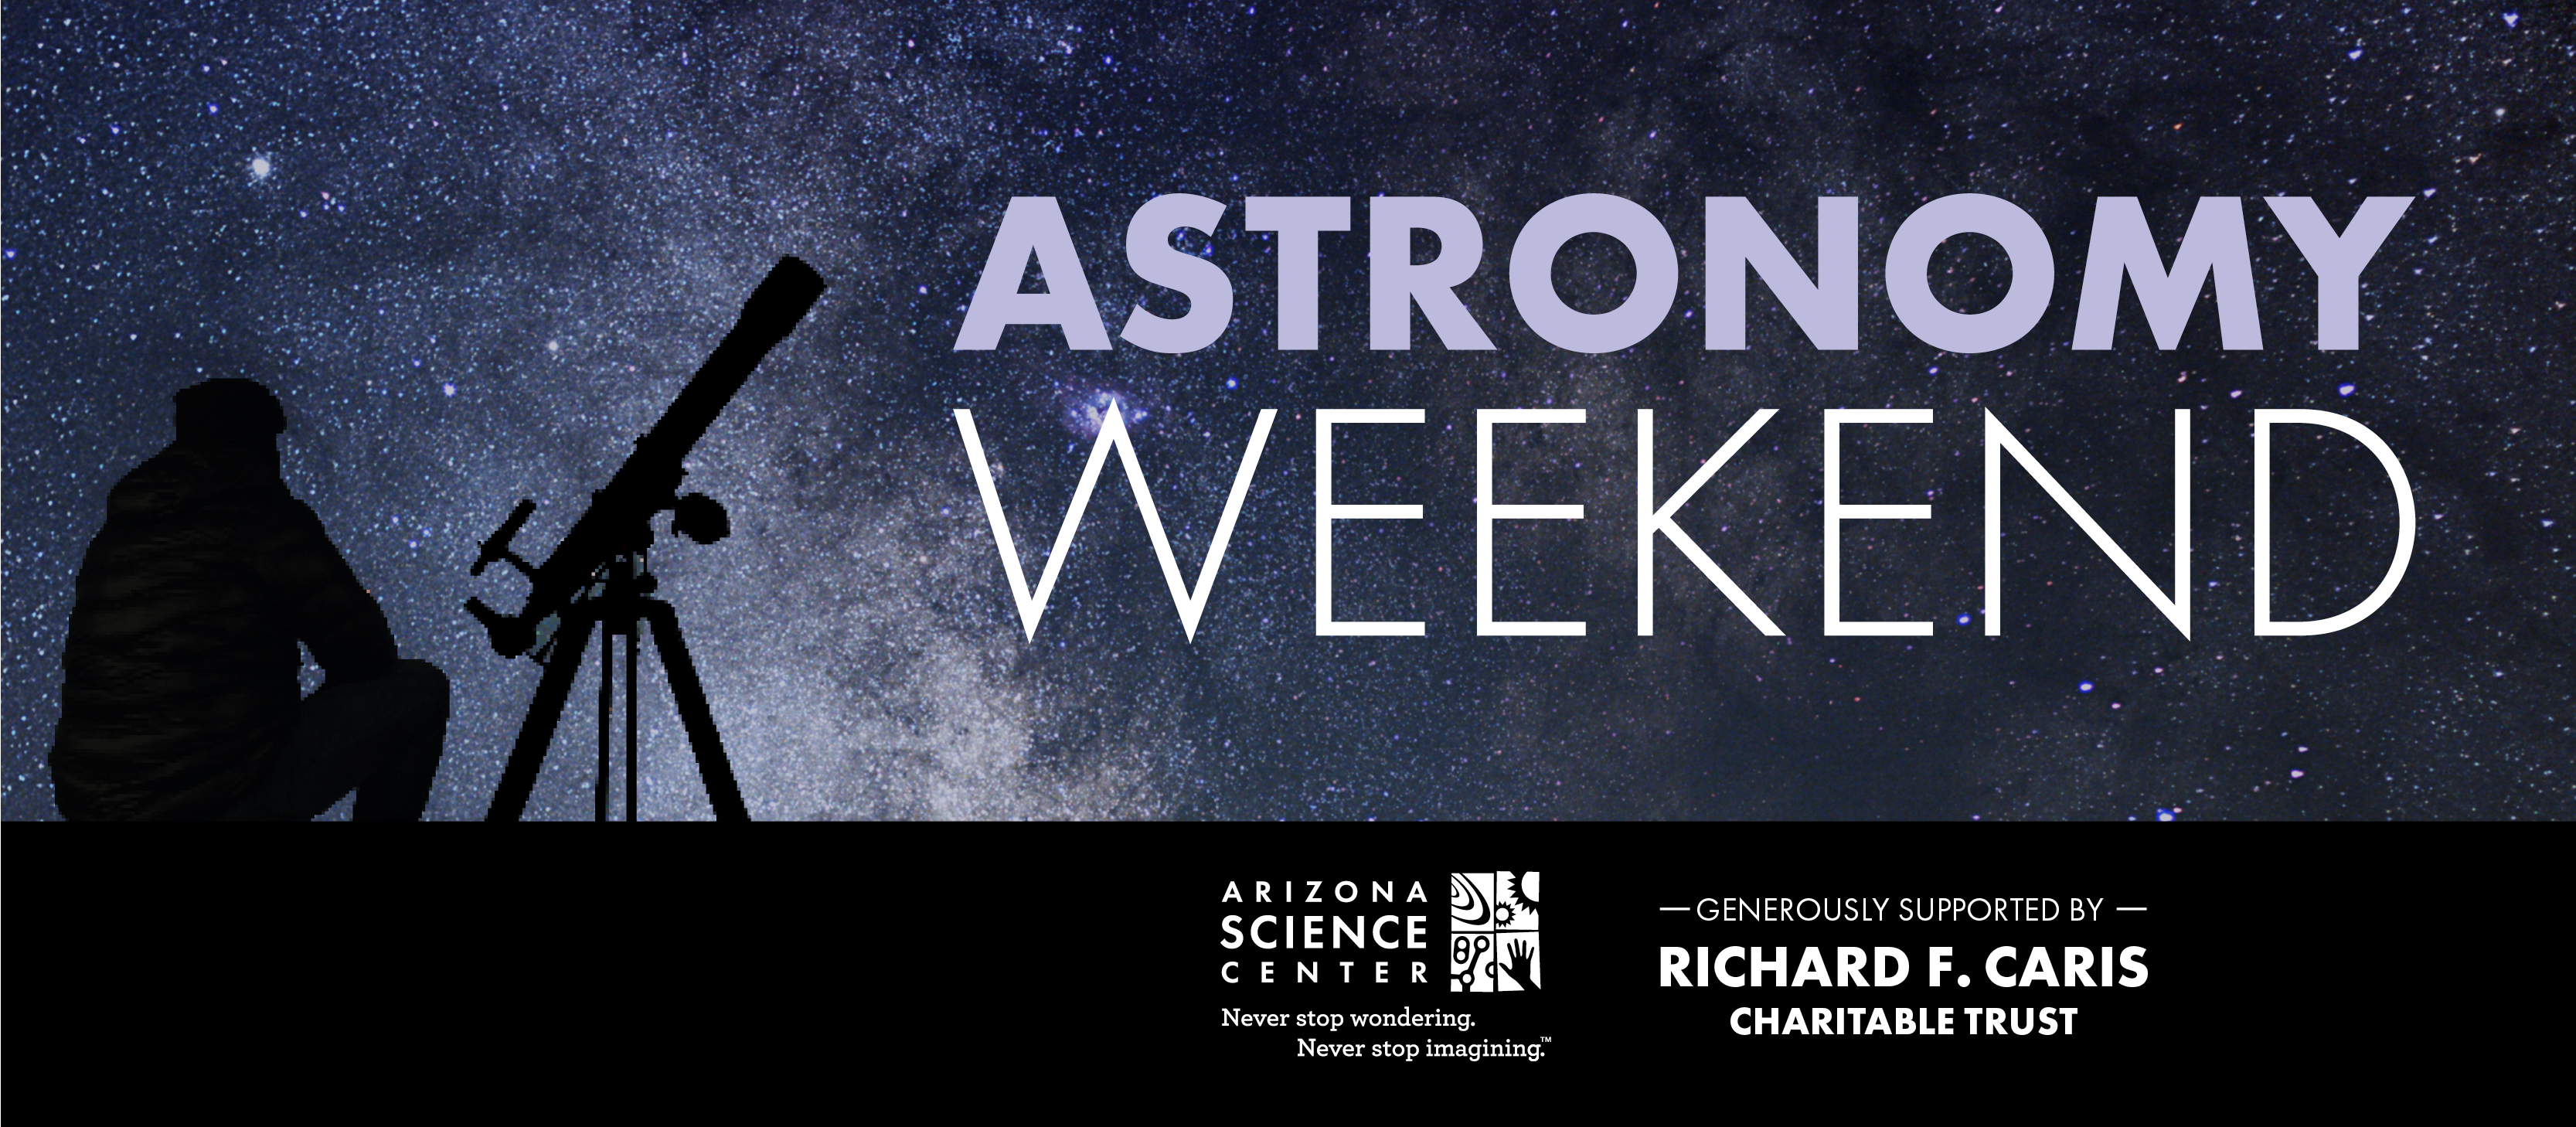 Astronomy Weekend at Arizona Science Center